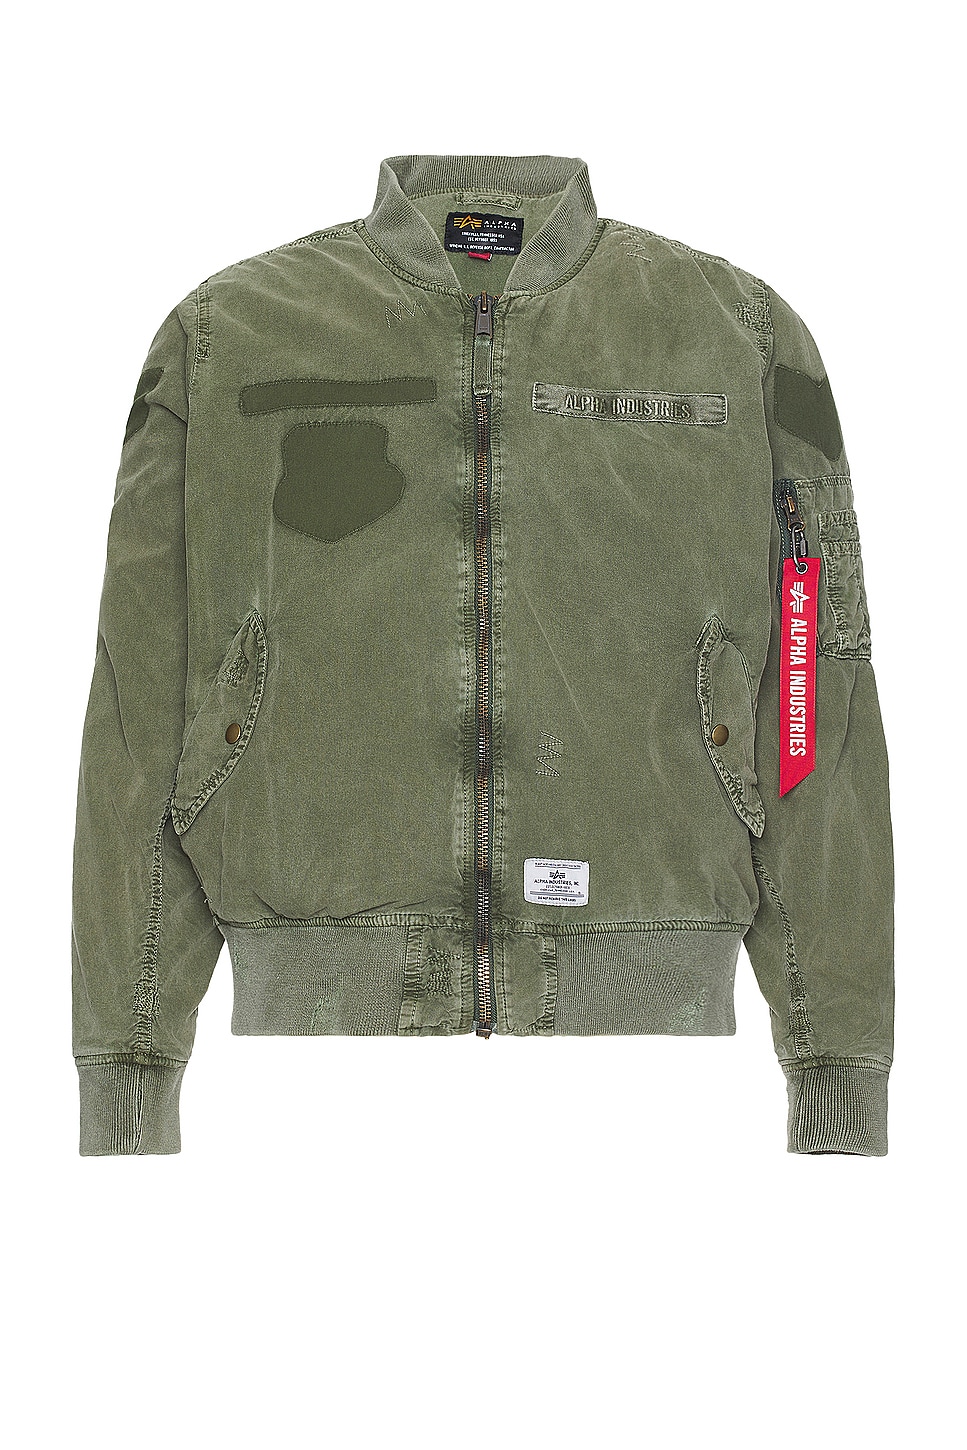 Image 1 of ALPHA INDUSTRIES L-2b Rip And Repair Flight Jacket in Og-107 Green